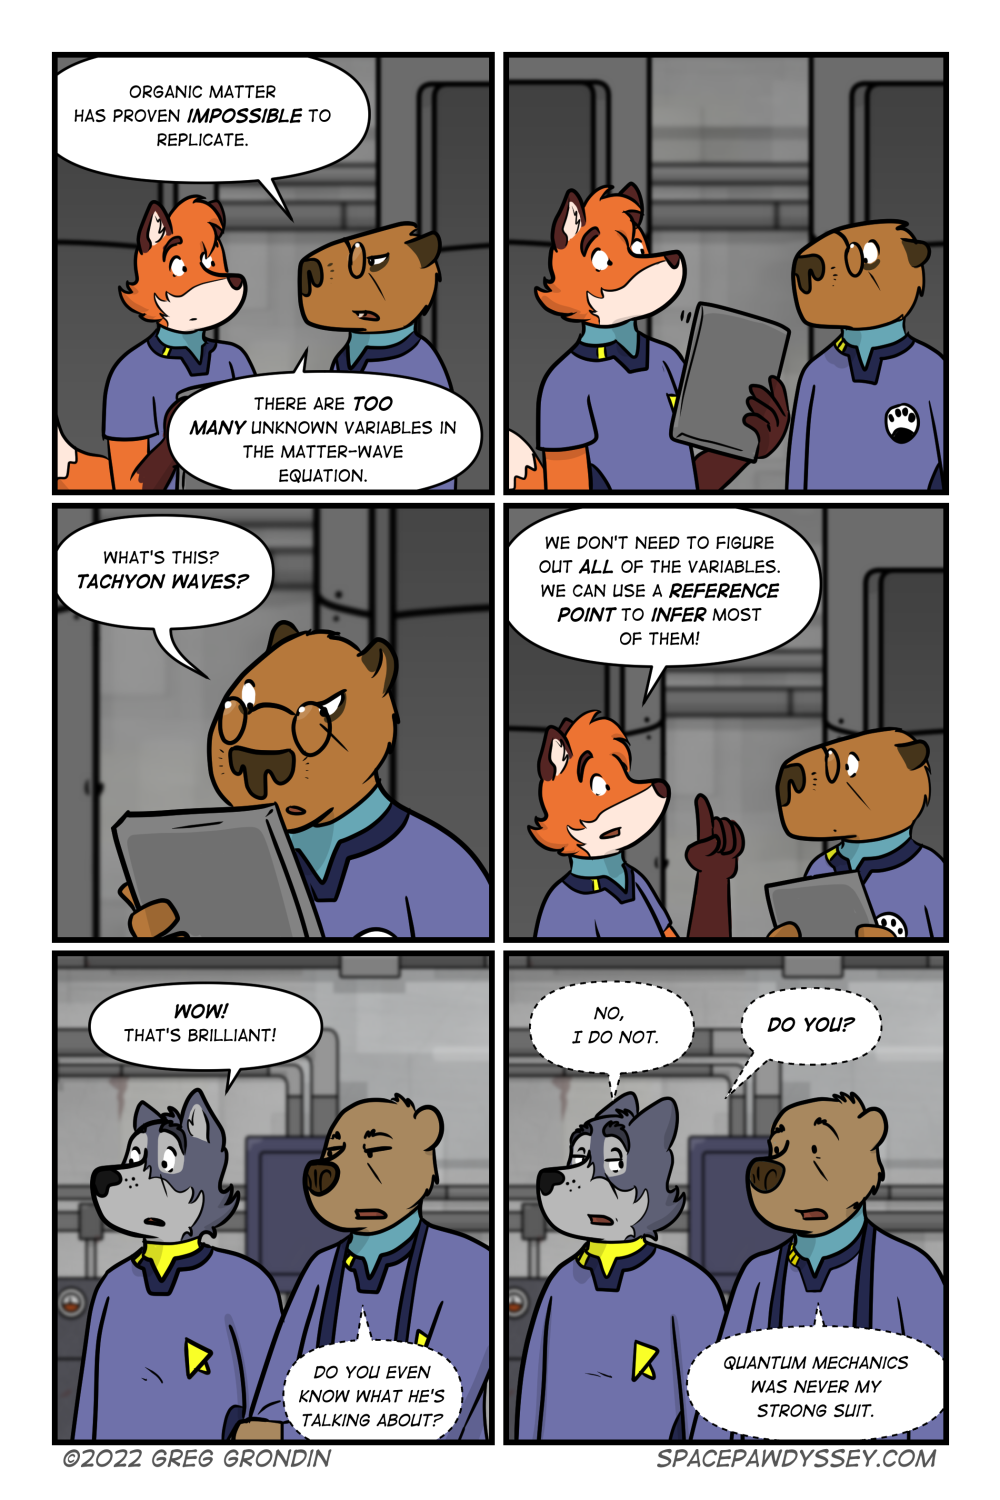 Space Pawdyssey #553